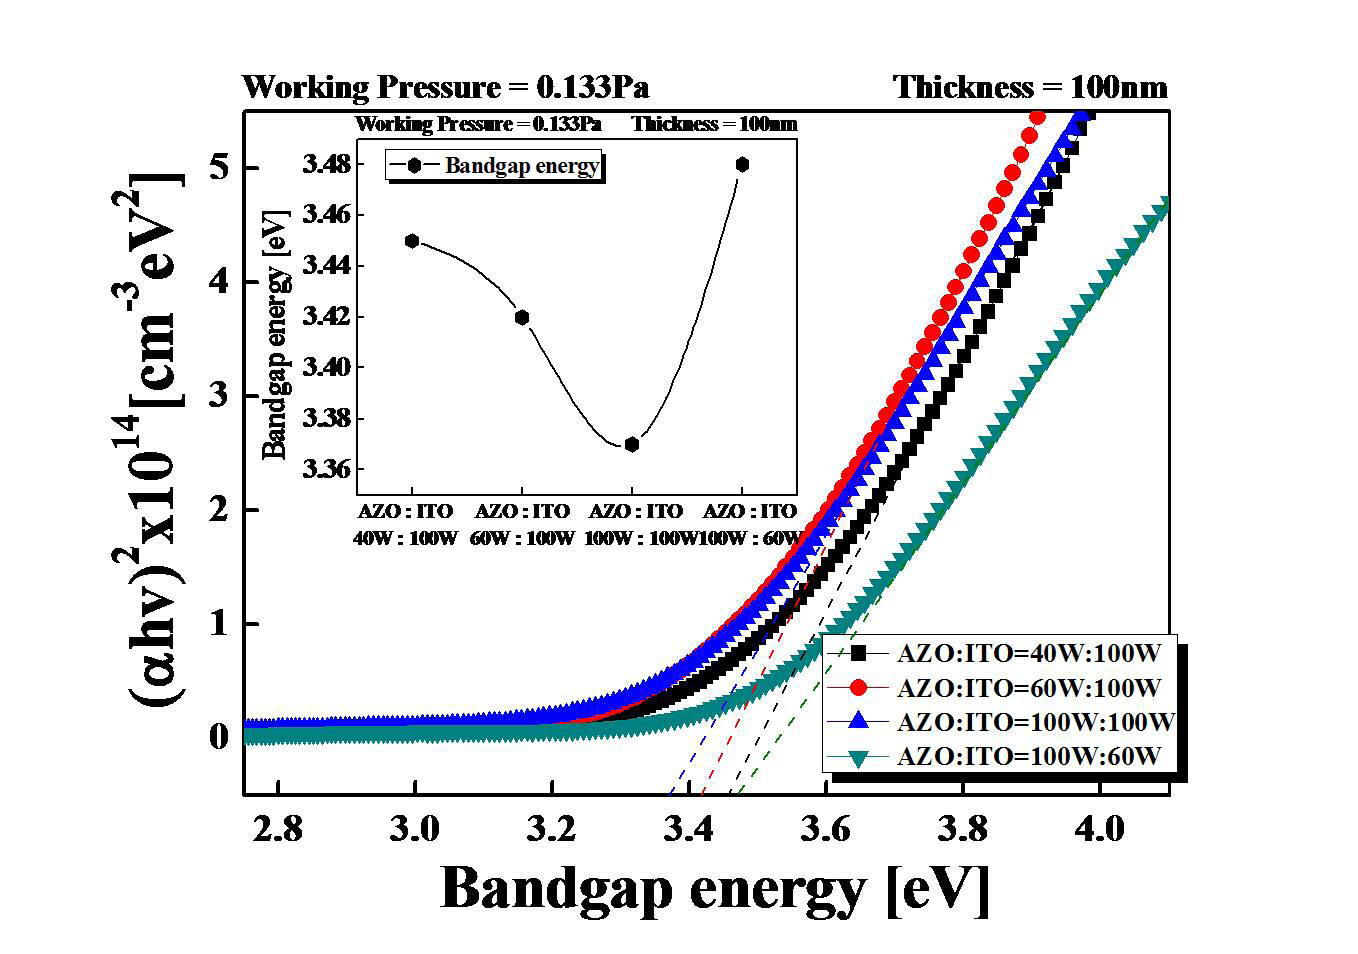 Optical band-gap energy of AIZTO thin films prepared on glass substrate as function of input power. AZO: aluminum zinc oxide ITO:indium tin oxide.